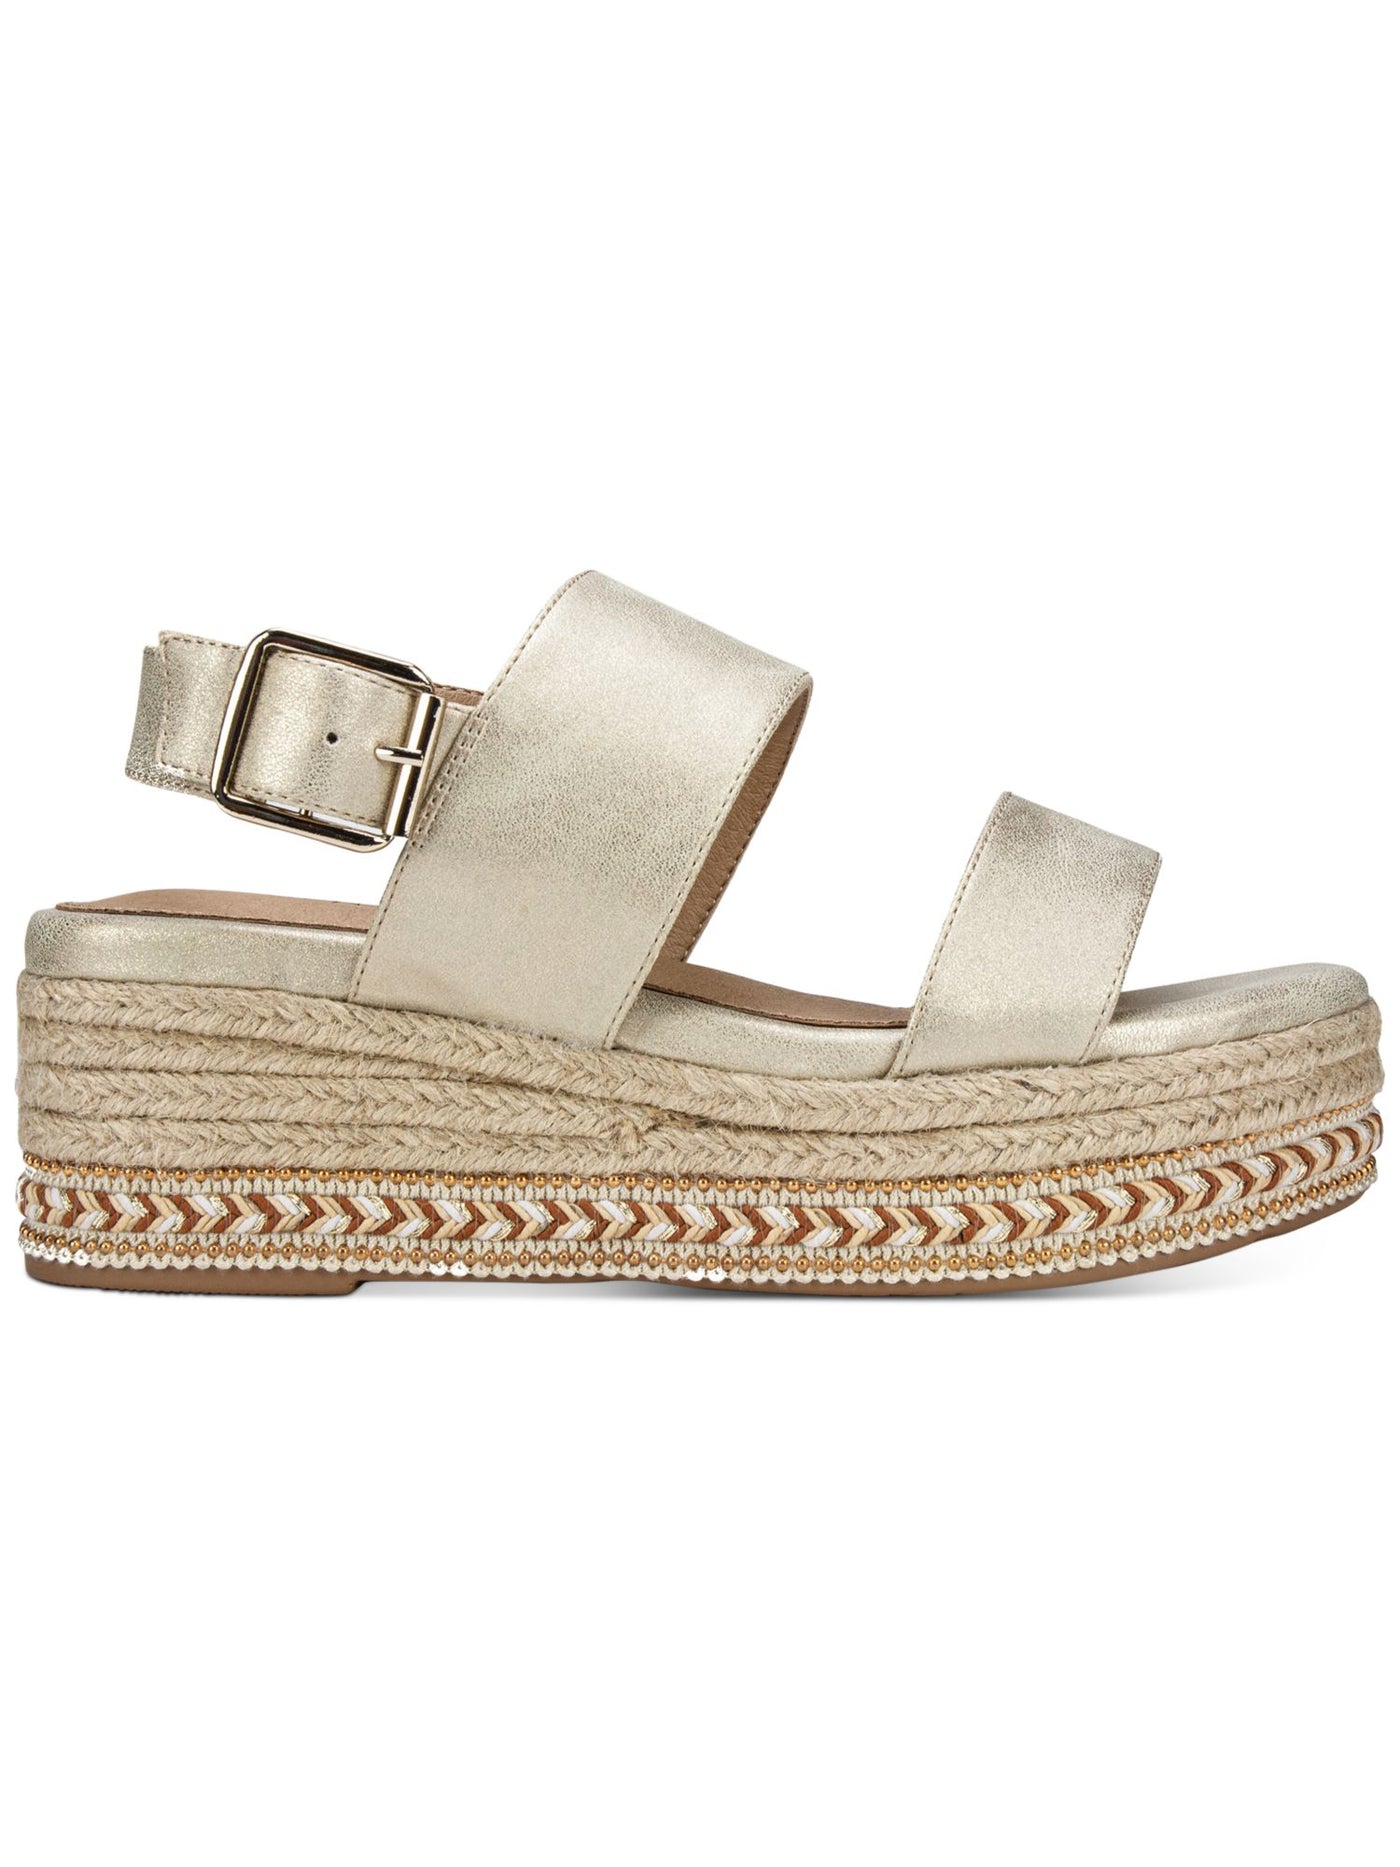 SEVEN DIALS Womens Gold 1" Platform Beaded Ankle Strap Cushioned Leawood Round Toe Wedge Buckle Espadrille Shoes 6.5 M